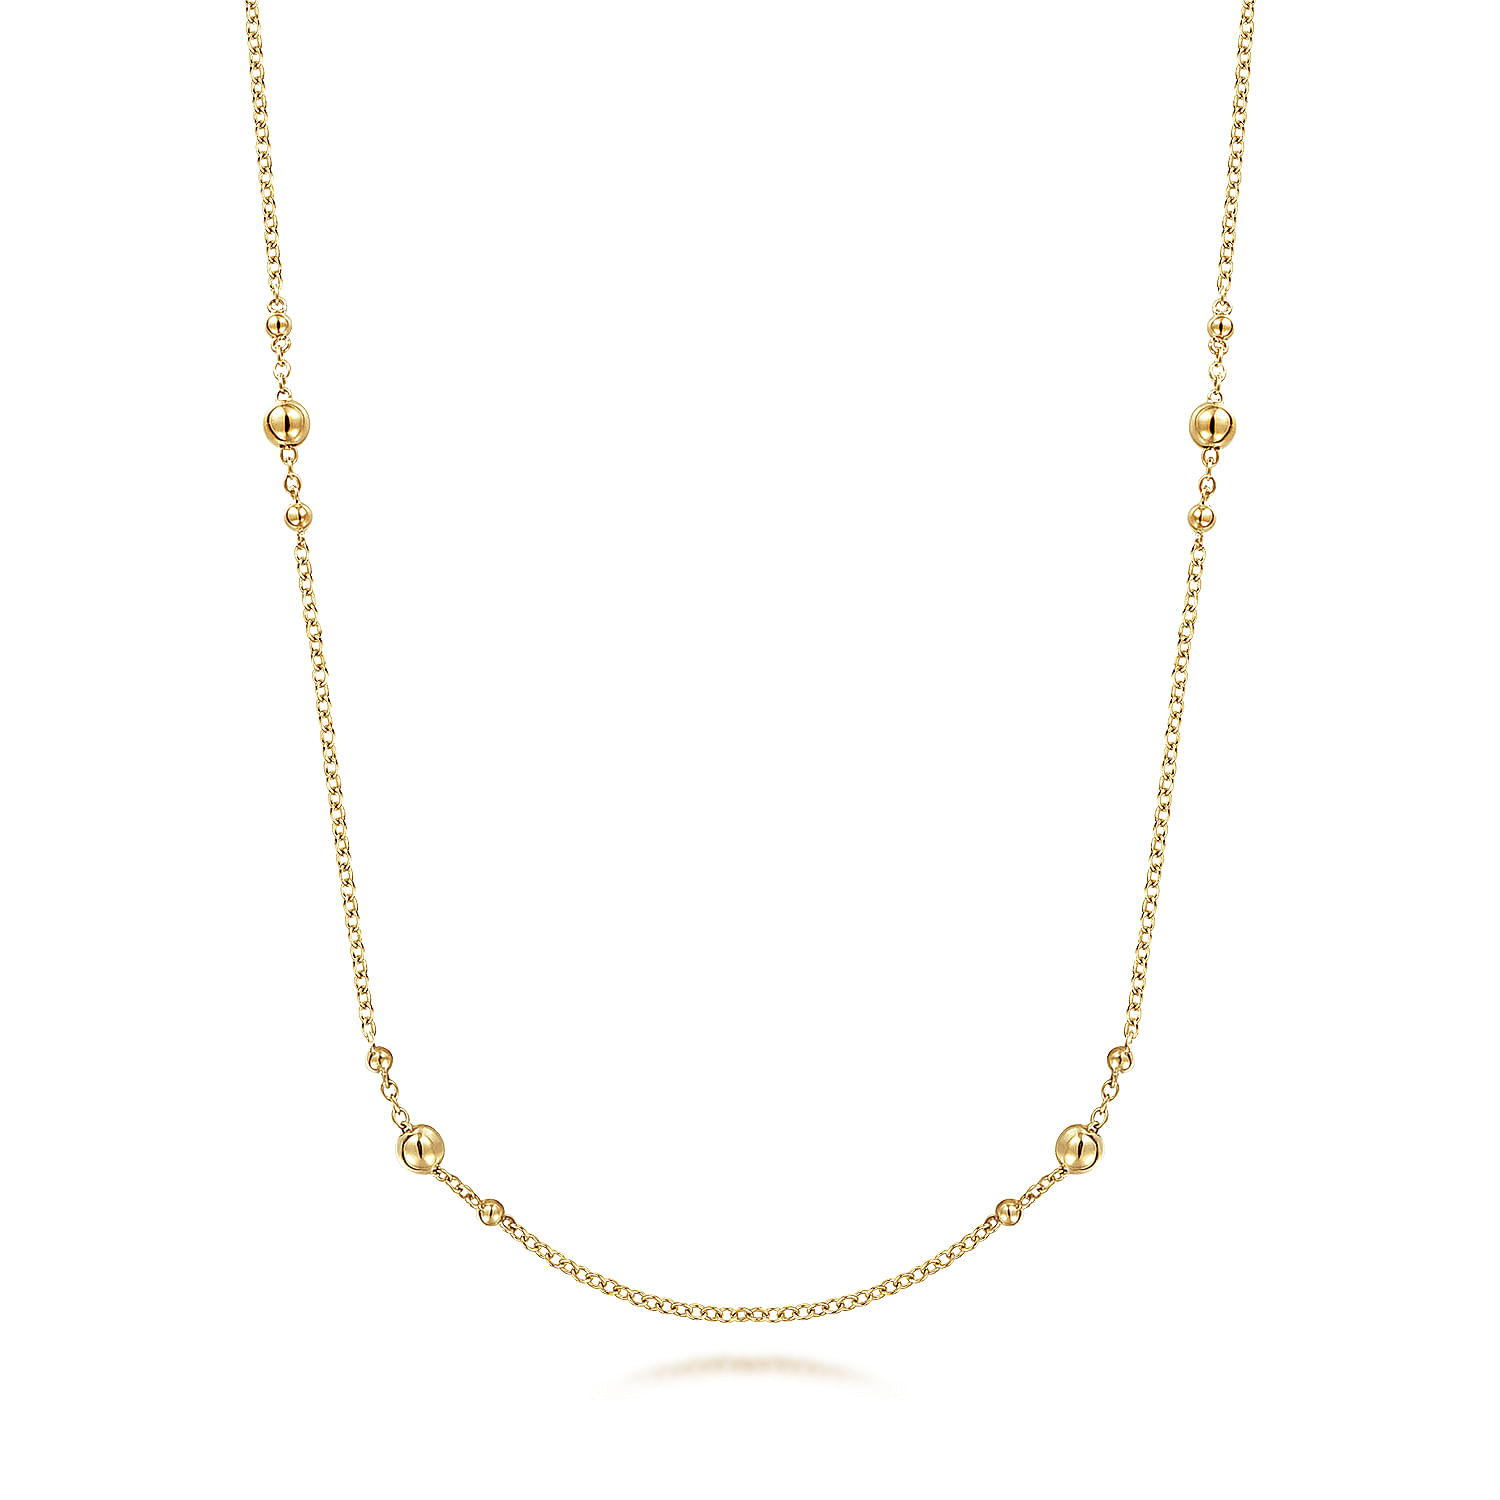 32 inch 14K Yellow Gold Bujukan Bead Station Necklace